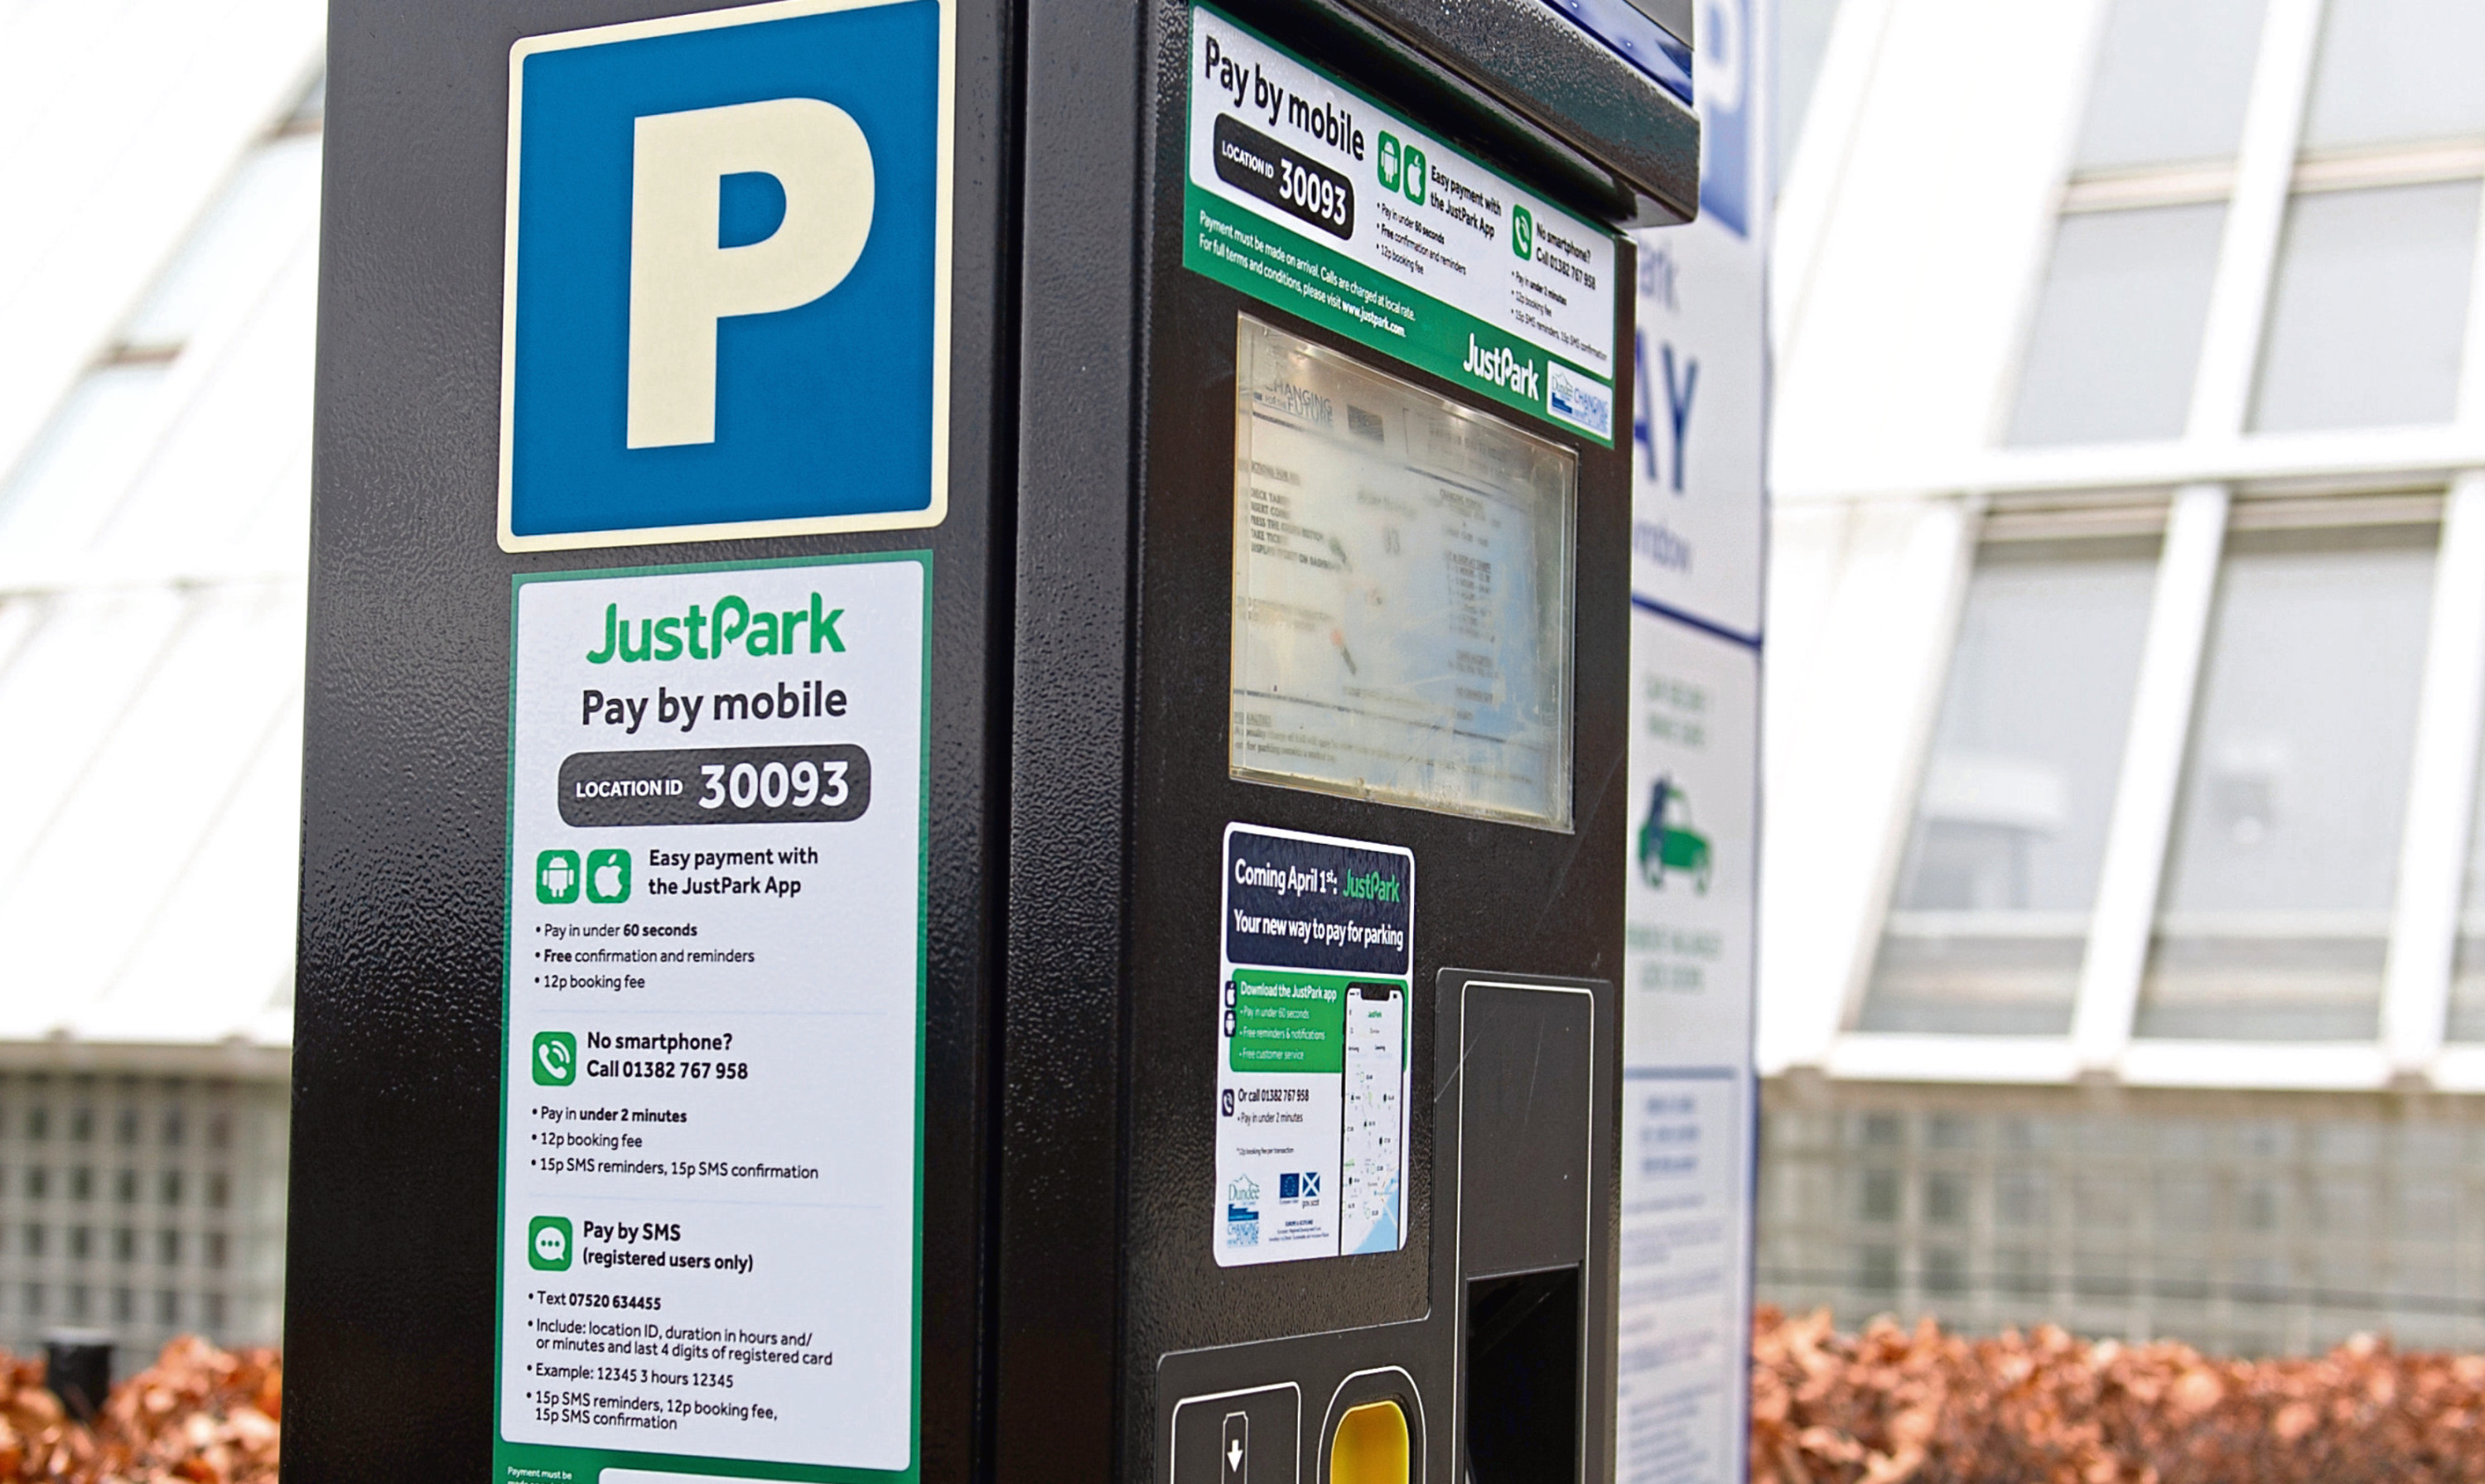 One of the JustPark meters.